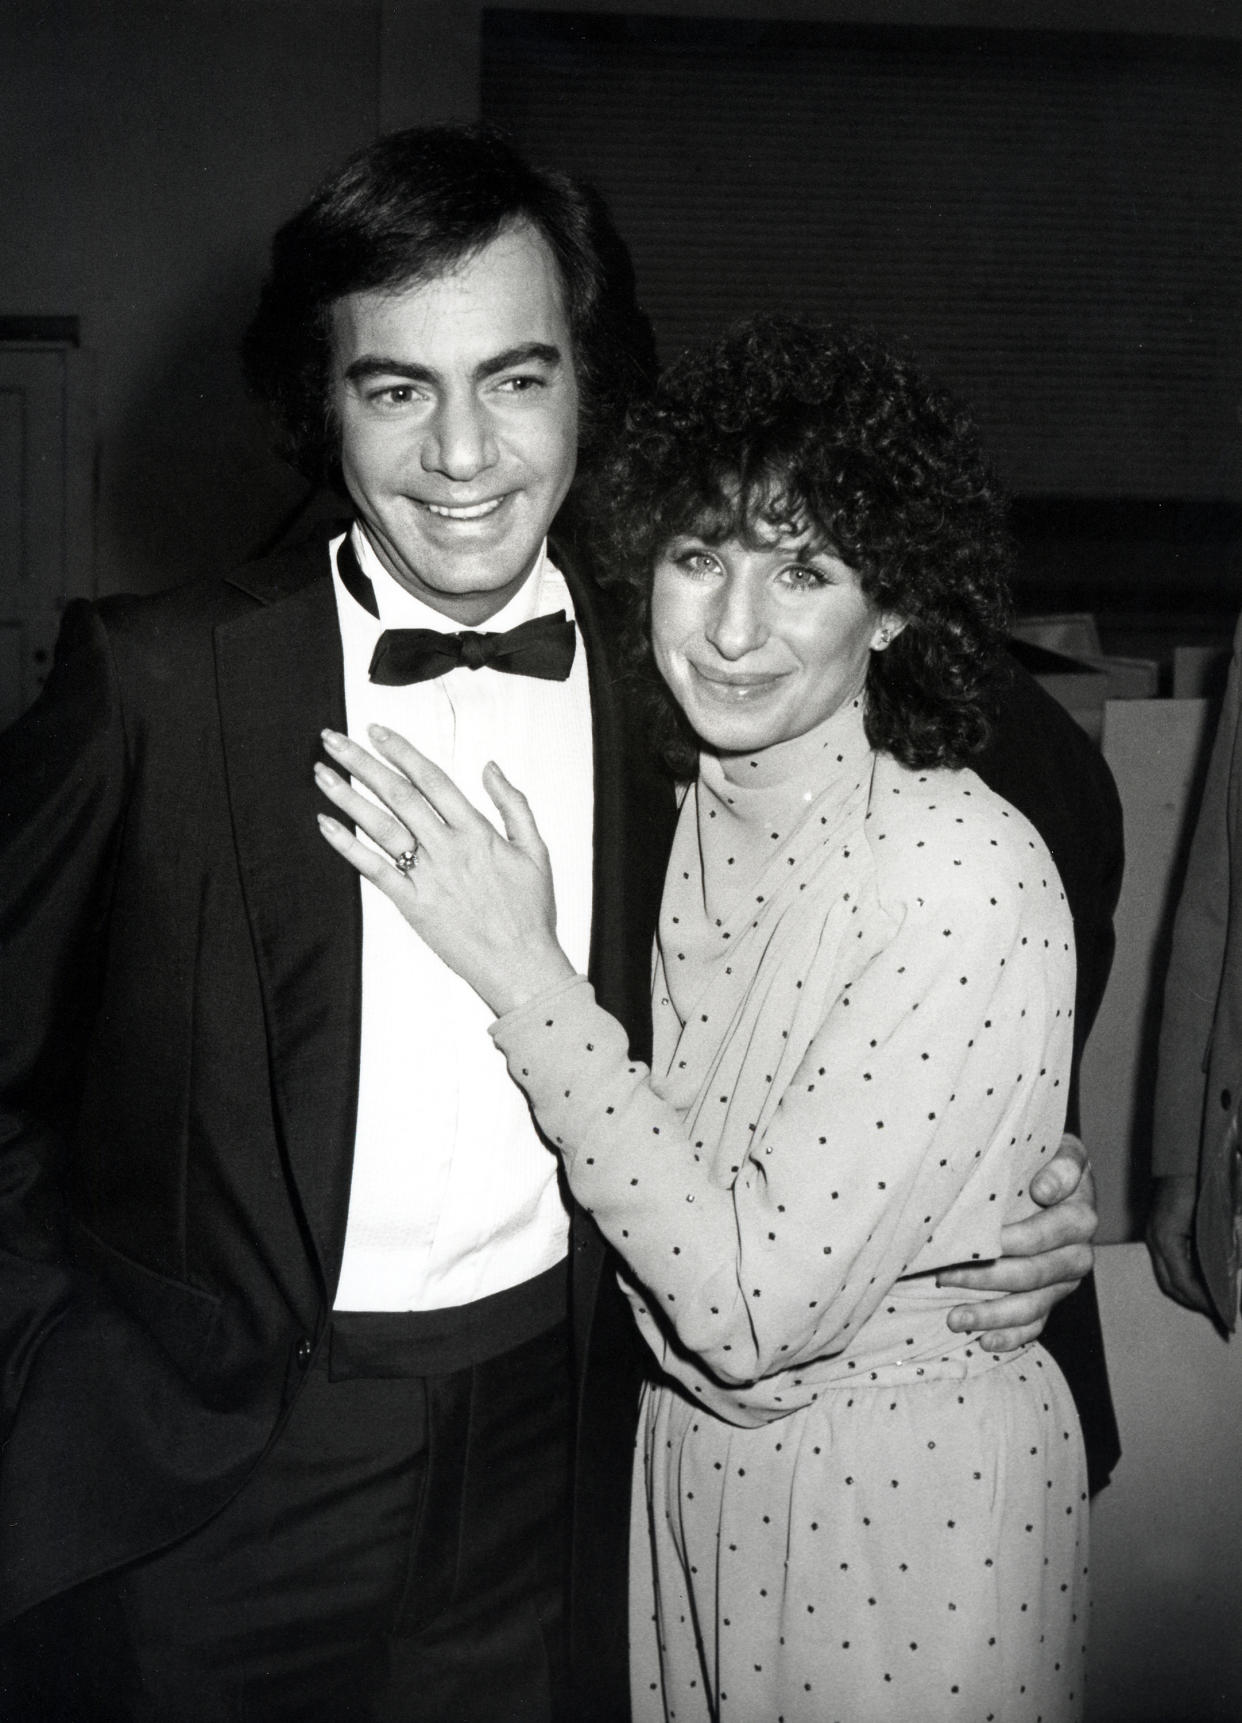 Neil Diamond & Barbra Streisand at the 22nd Annual Grammy Awards in 1980. (Photo: Getty Images)